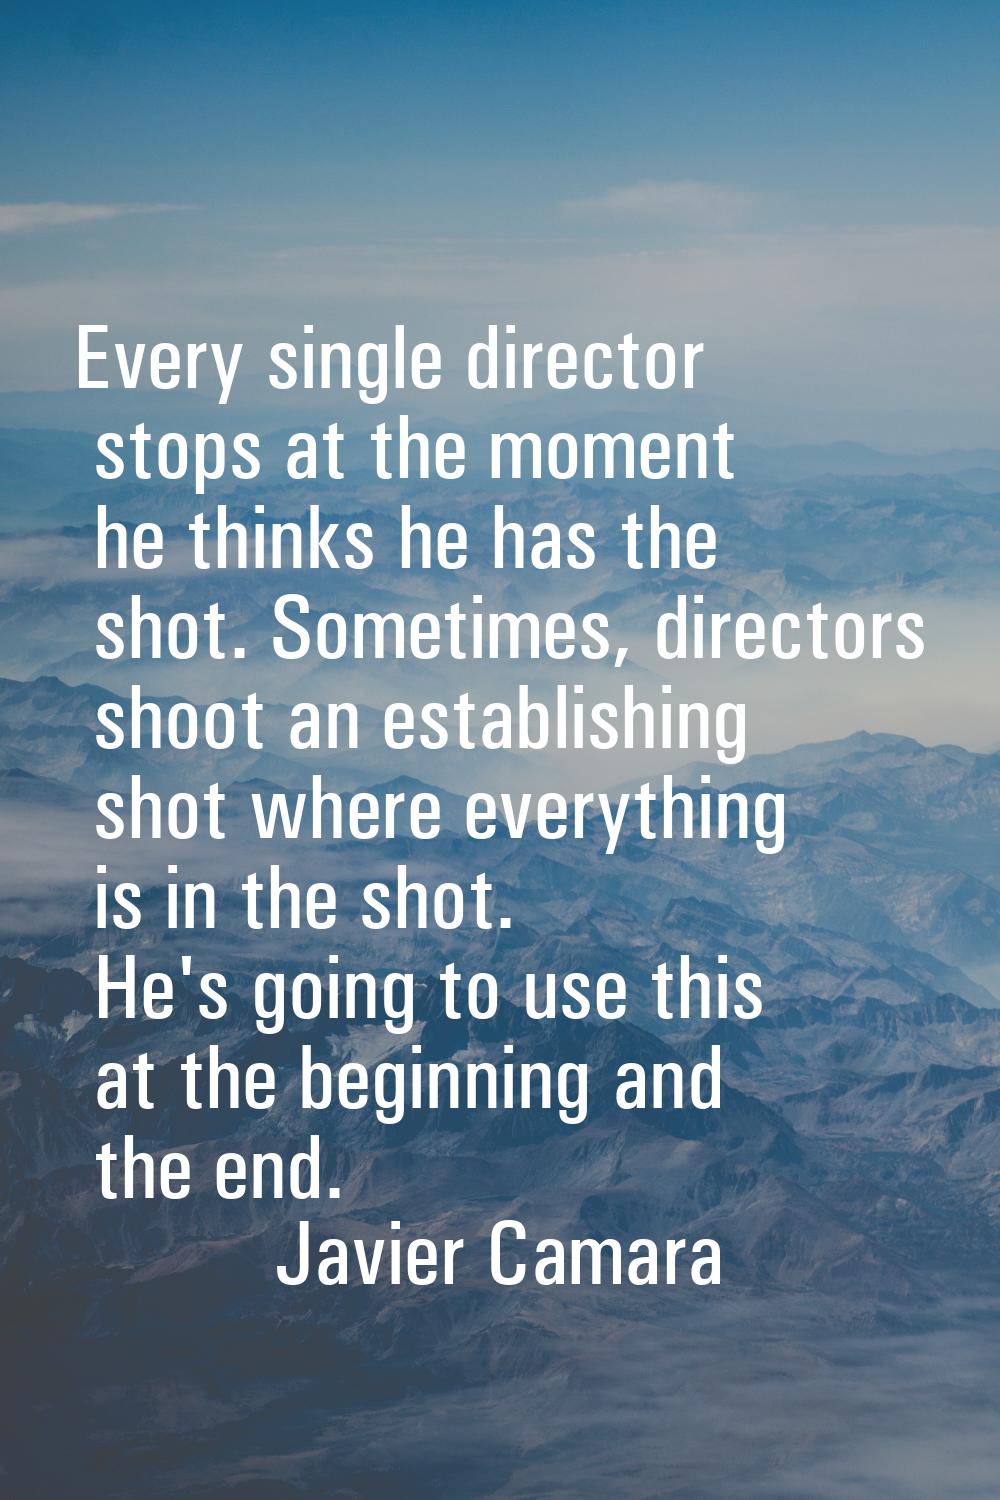 Every single director stops at the moment he thinks he has the shot. Sometimes, directors shoot an 